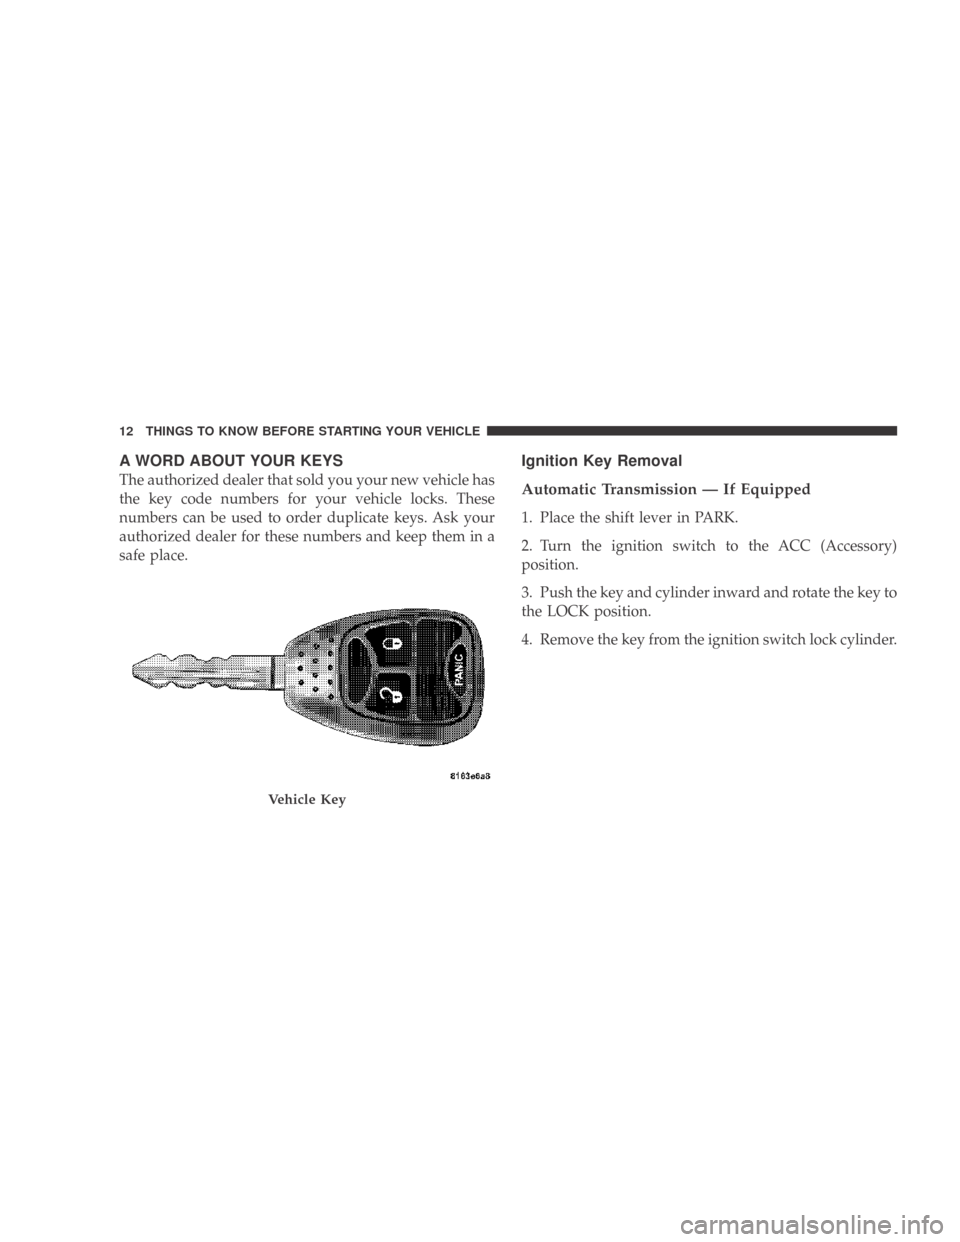 DODGE CALIBER 2009 1.G Owners Manual A WORD ABOUT YOUR KEYS
The authorized dealer that sold you your new vehicle has
the key code numbers for your vehicle locks. These
numbers can be used to order duplicate keys. Ask your
authorized deal